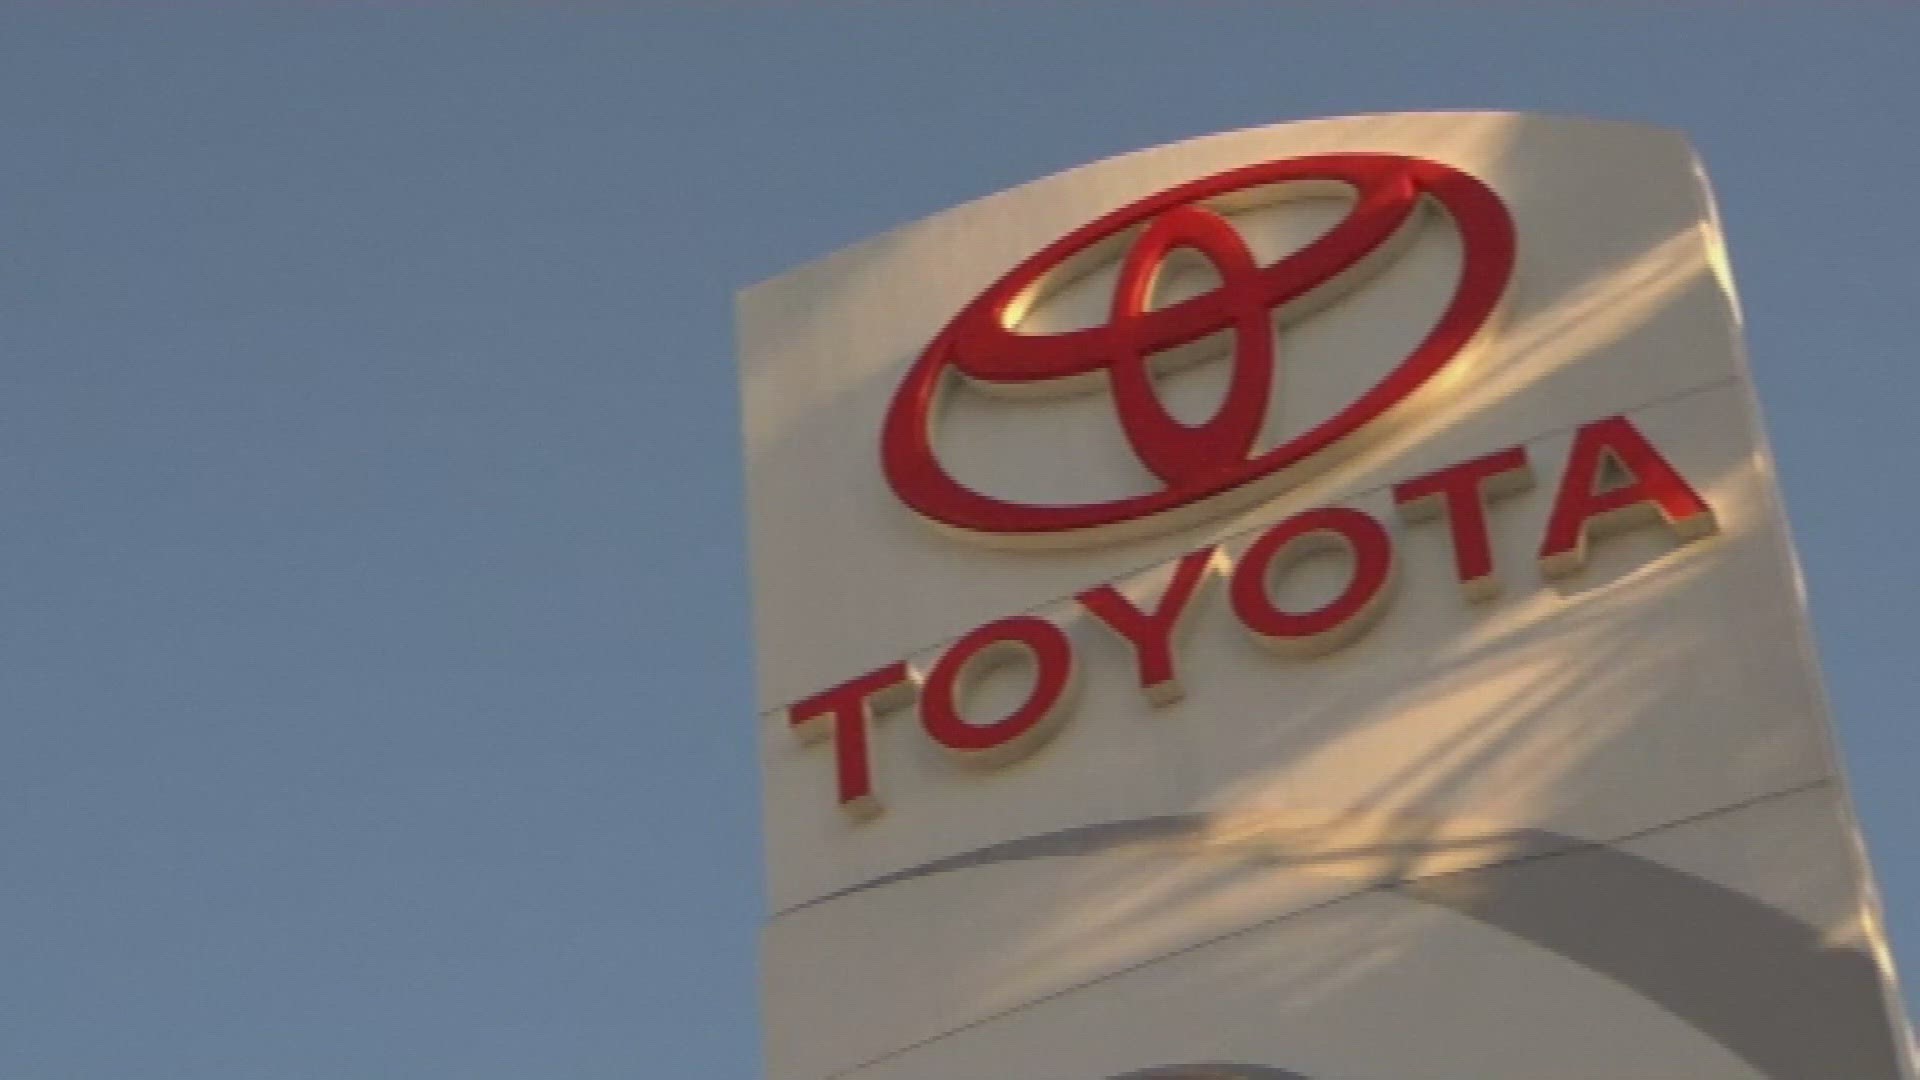 Toyota declined to say if the recall issue had caused any fires, crashes or injuries.